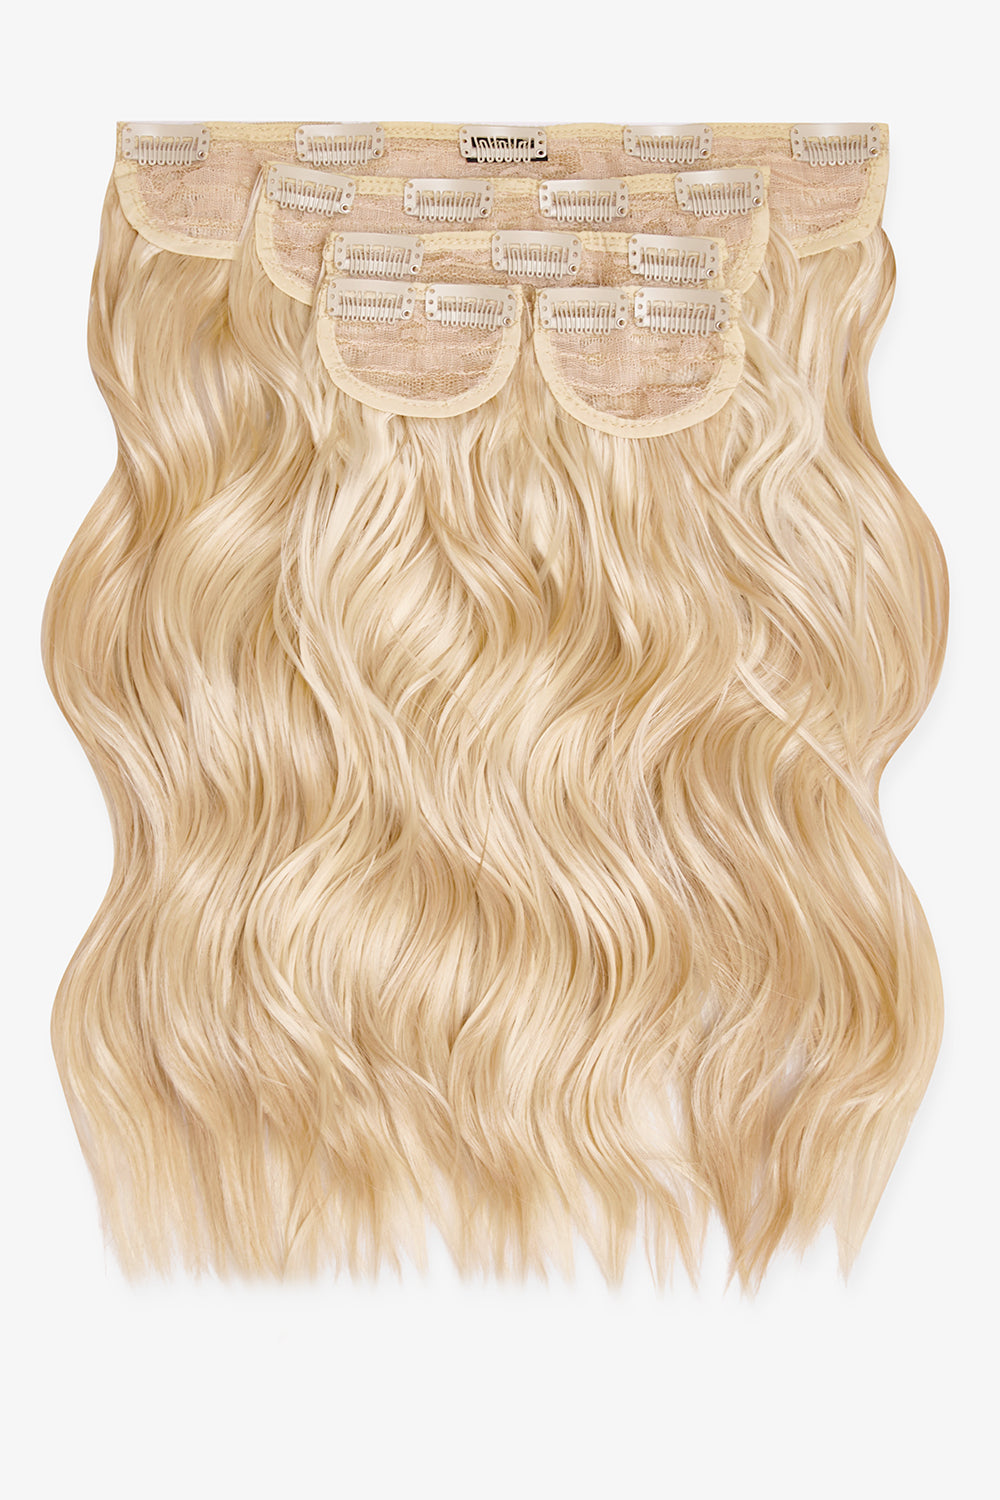 Super Thick 16’’ 5 Piece Brushed Out Wave Clip In Hair Extensions + Hair Care Bundle - Highlighted Champagne